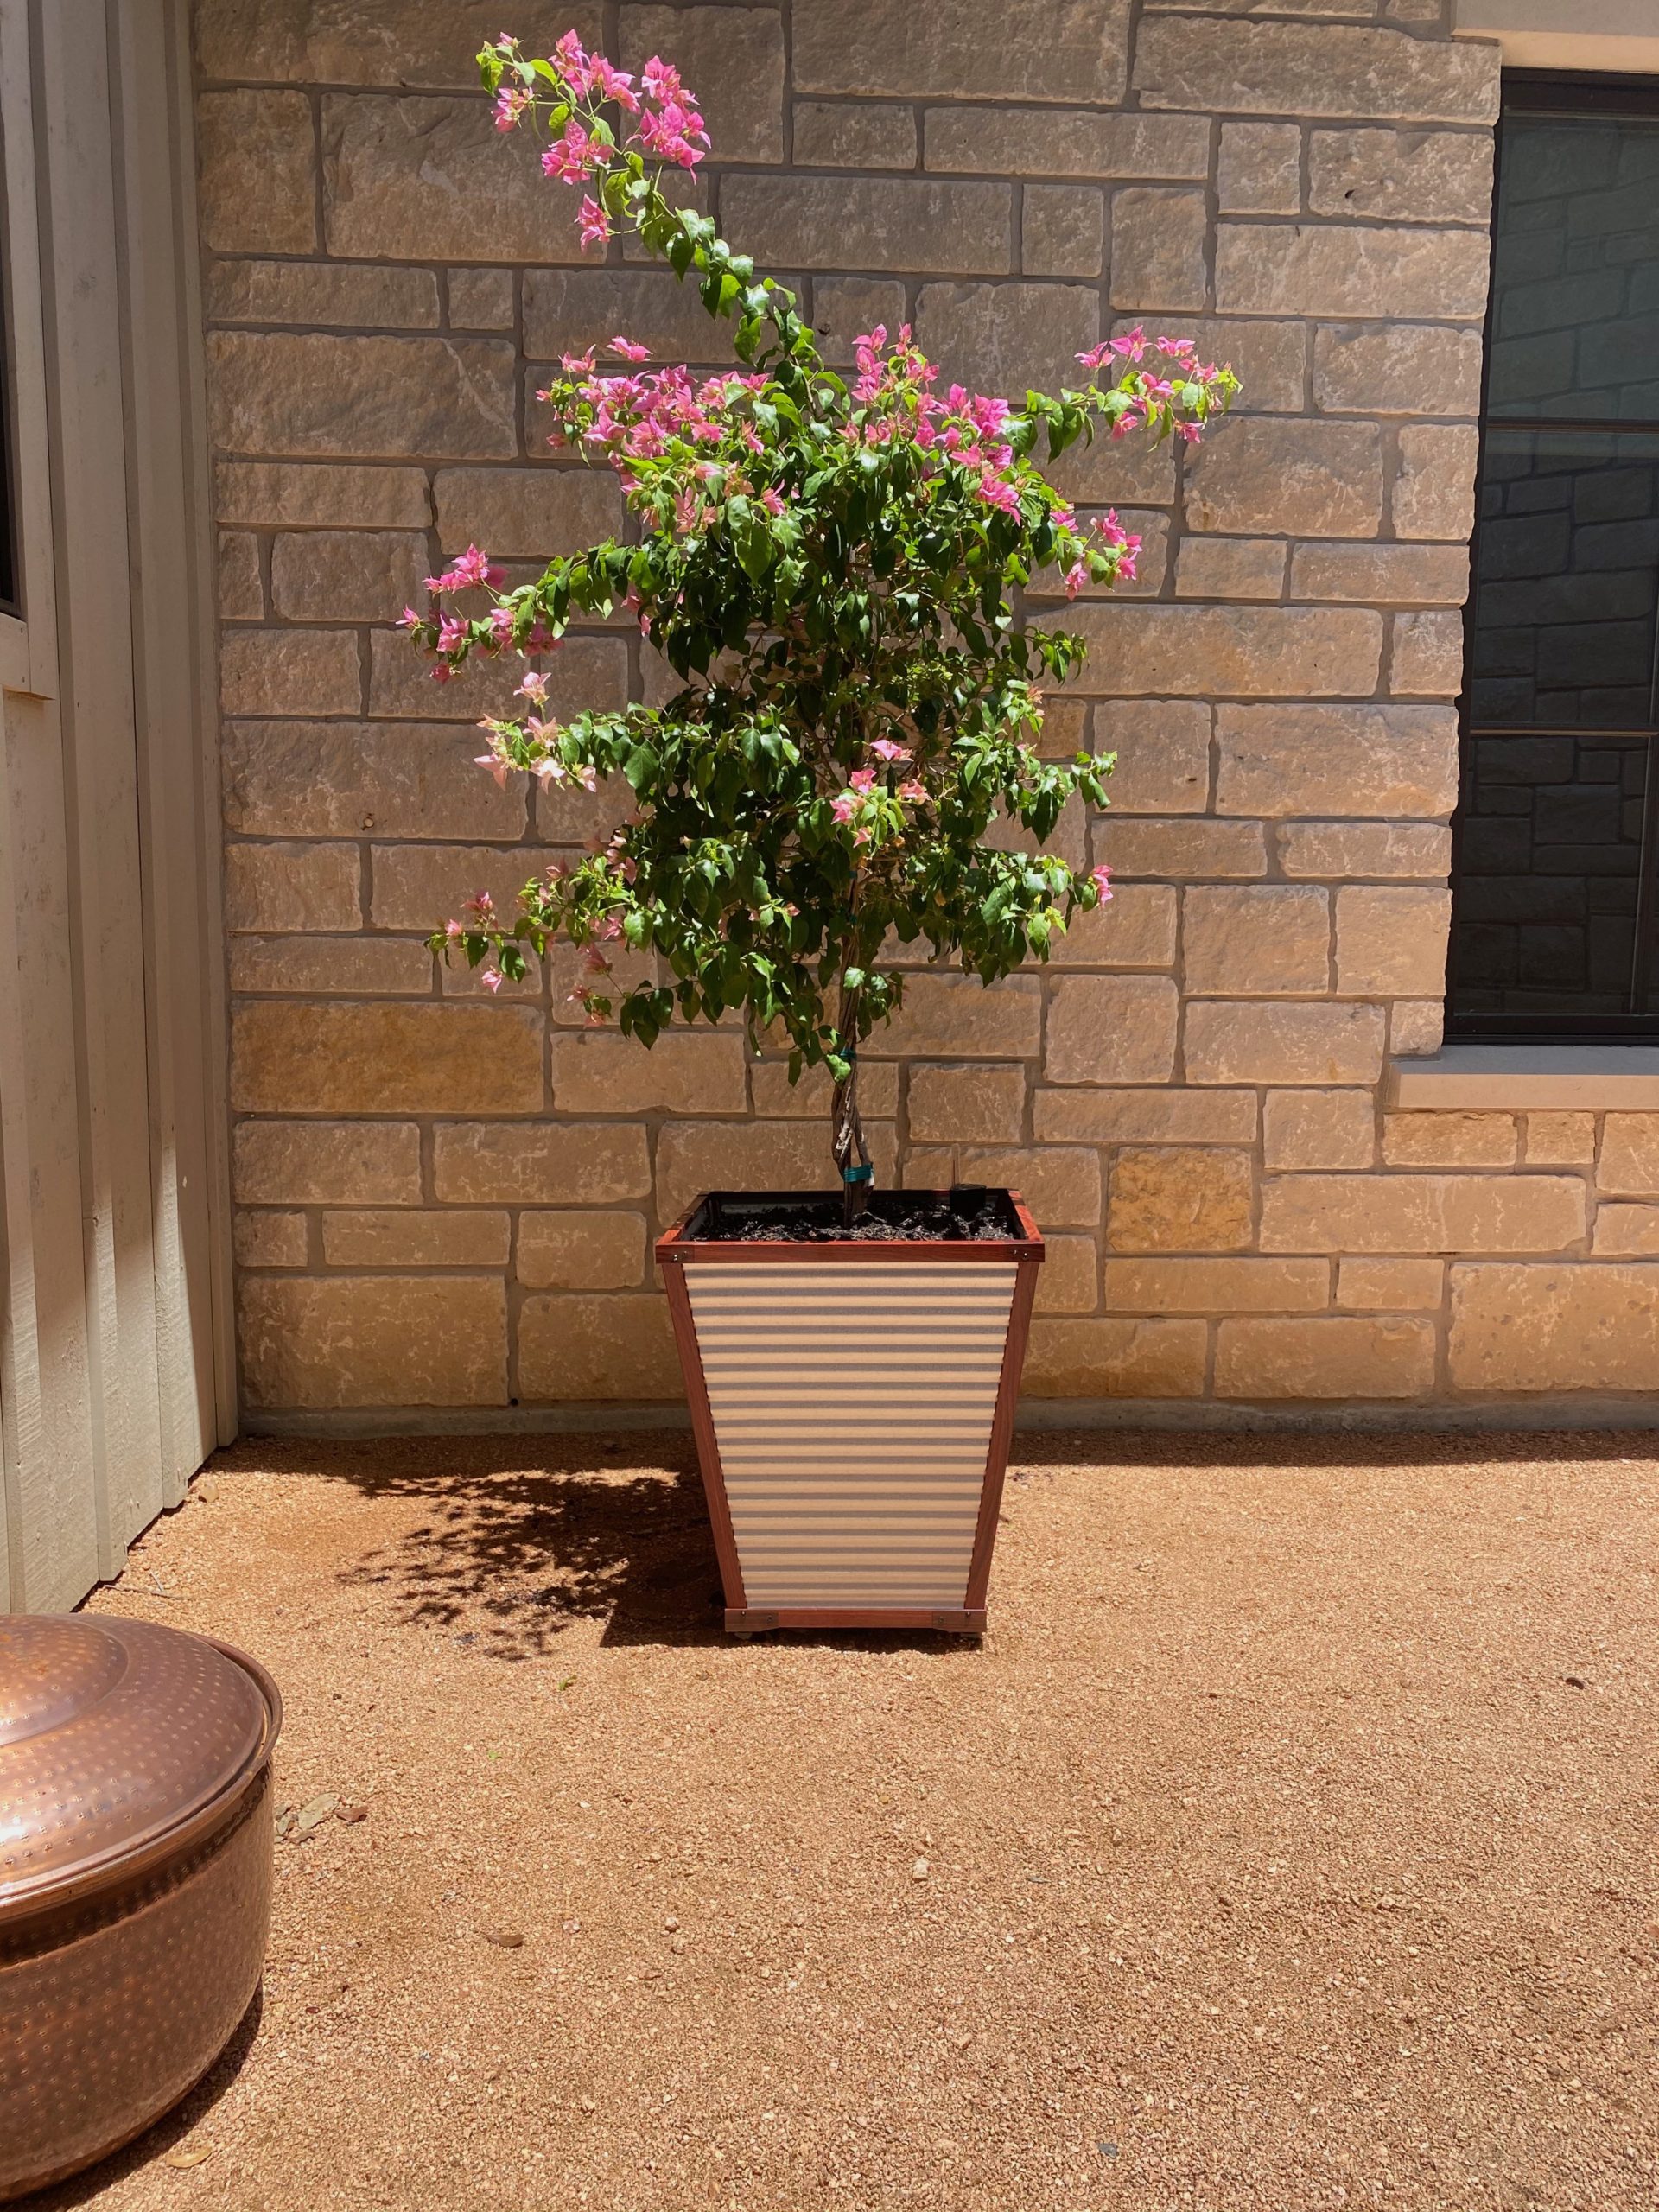 bougainvillea trained as a standard in the reservoir planter